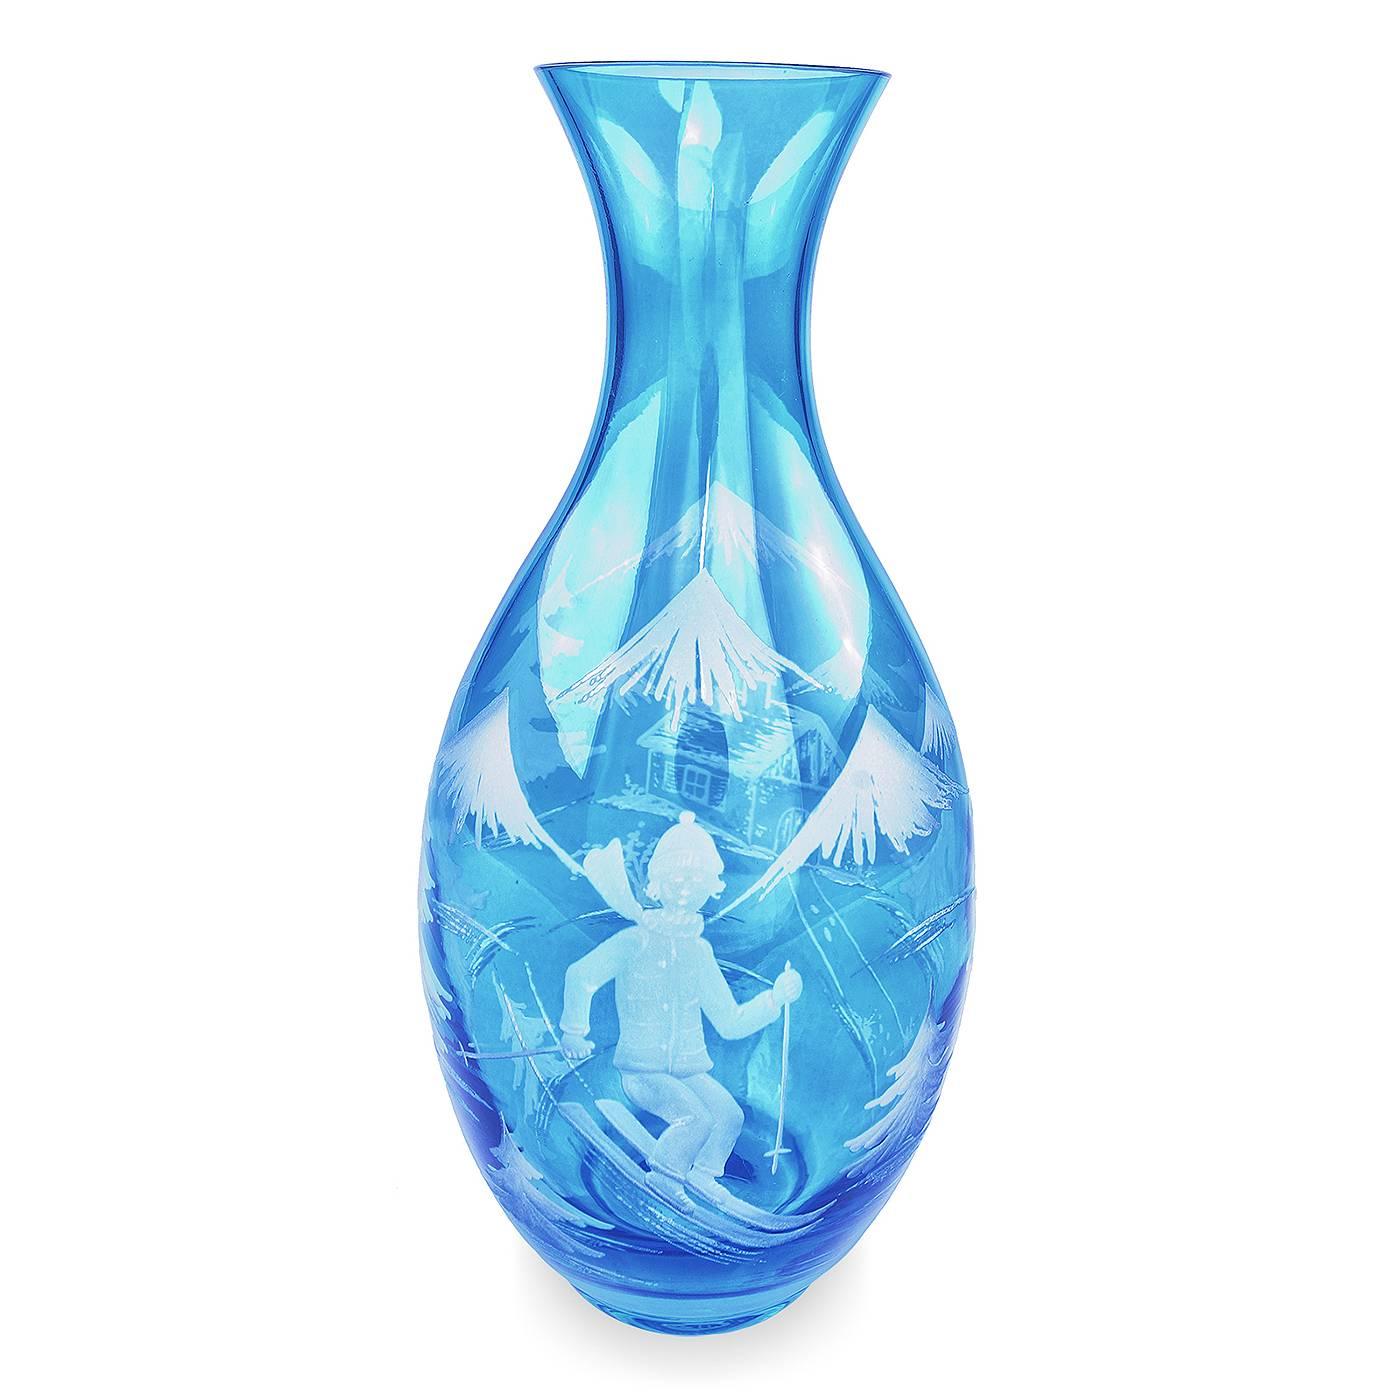 Hand-blown charming tumbler in blue crystal with a hands-free engraved decor. All around engraved with trees and house with a skier. A matching votiv and a carafe come sin the same decor.
 About sofina crystal:
Handblown crystal tumbler in blue with